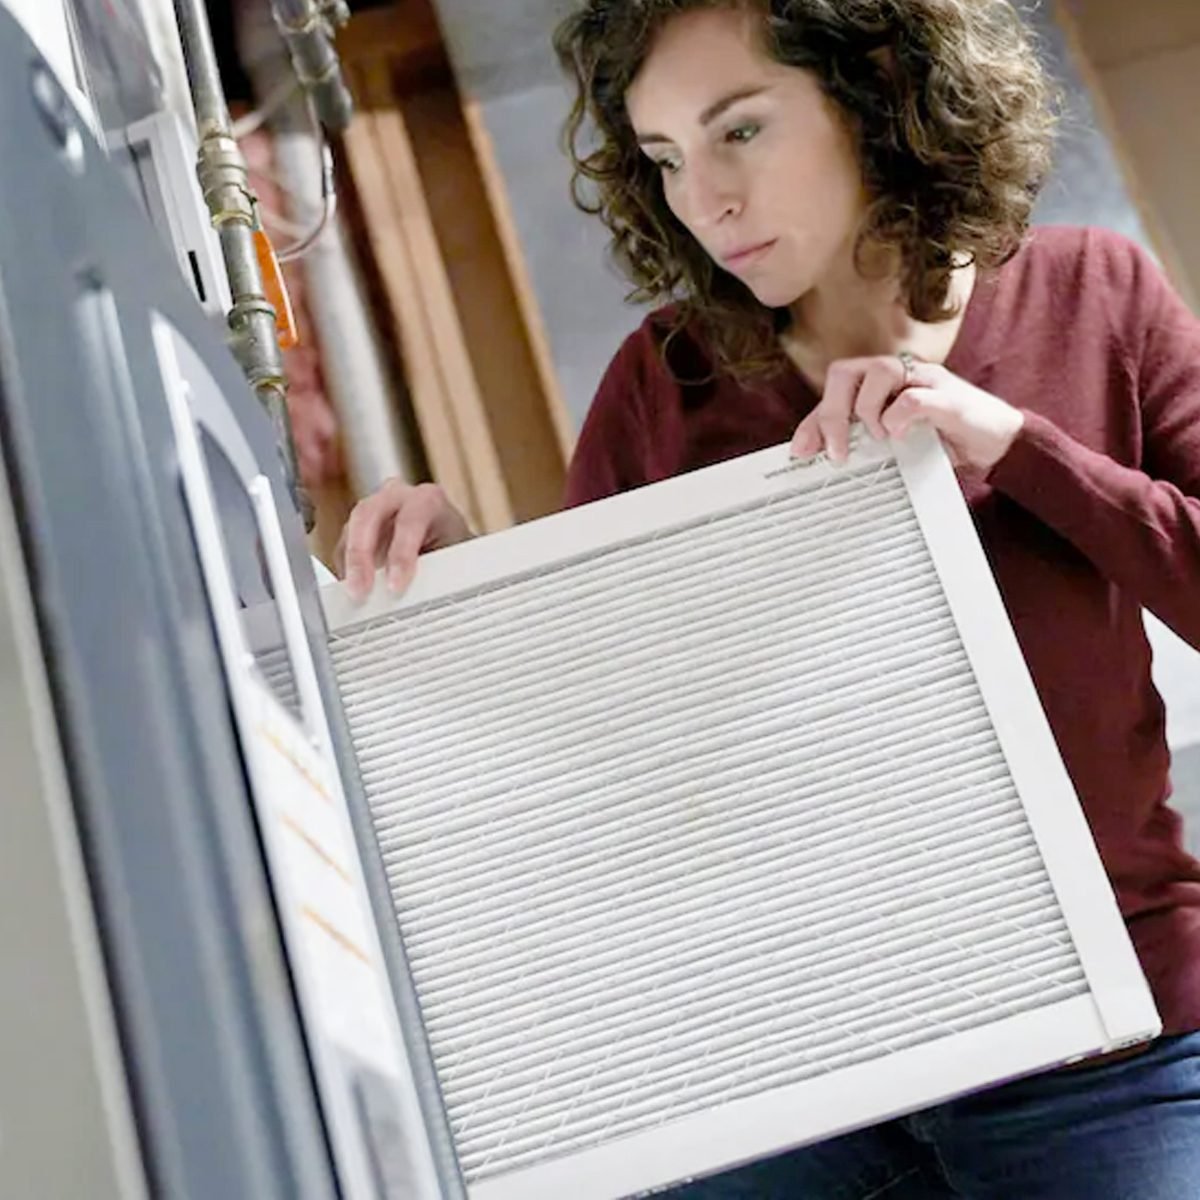 Top-Rated Furnace Filters for Allergies, Dust, Pet Owners & More